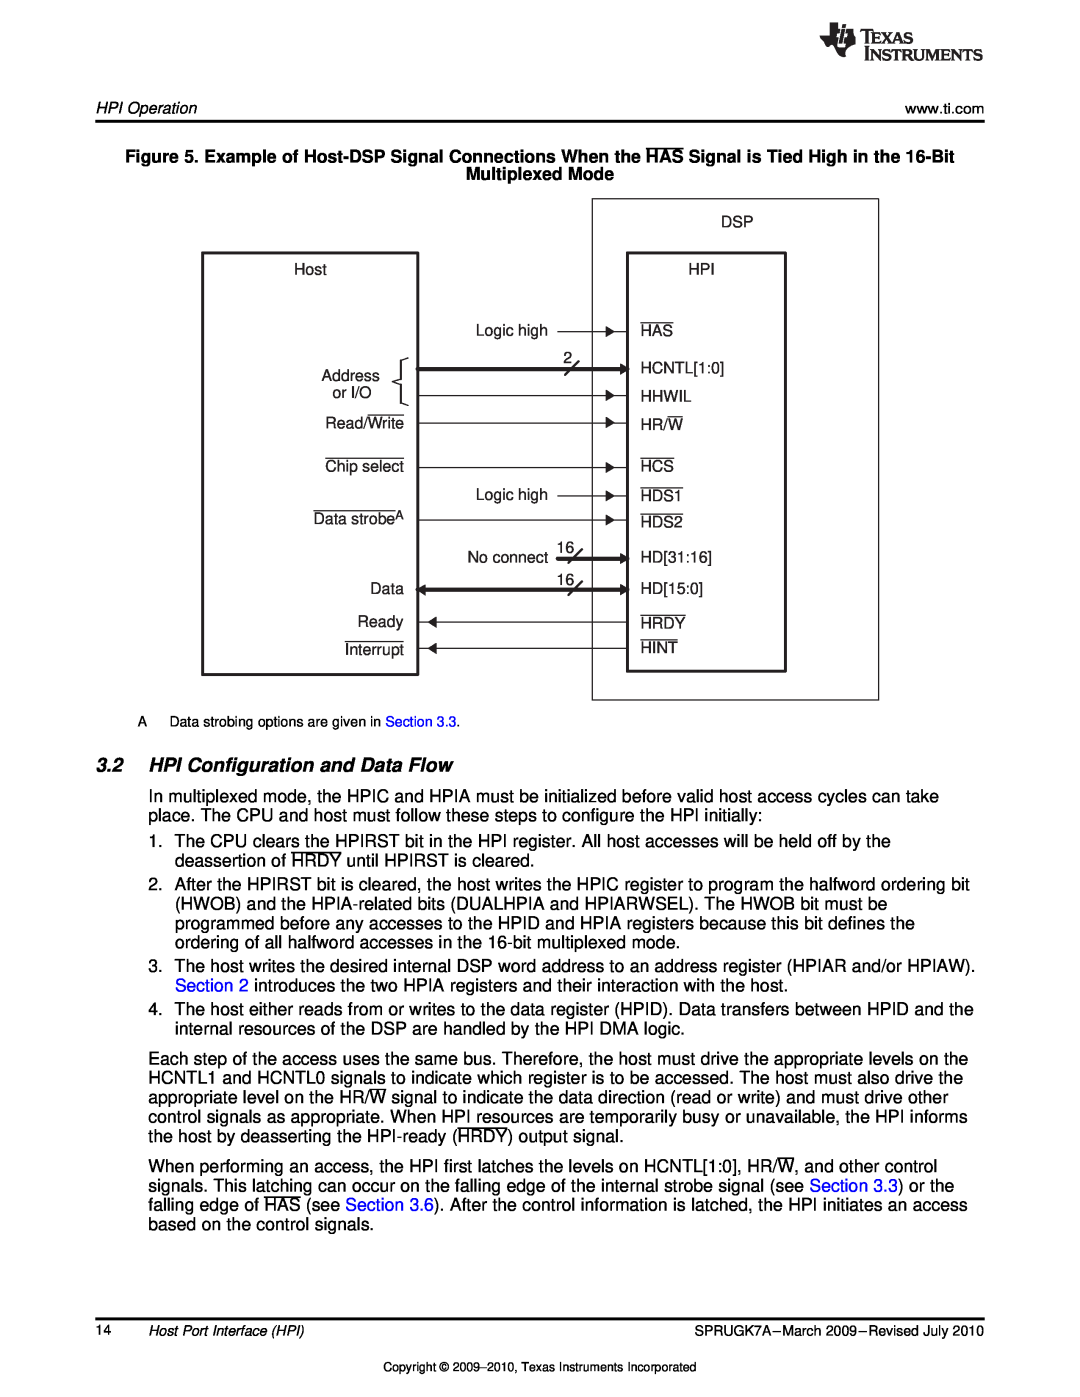 Texas Instruments TMS320C6457 manual HPI Configuration and Data Flow, Multiplexed Mode 